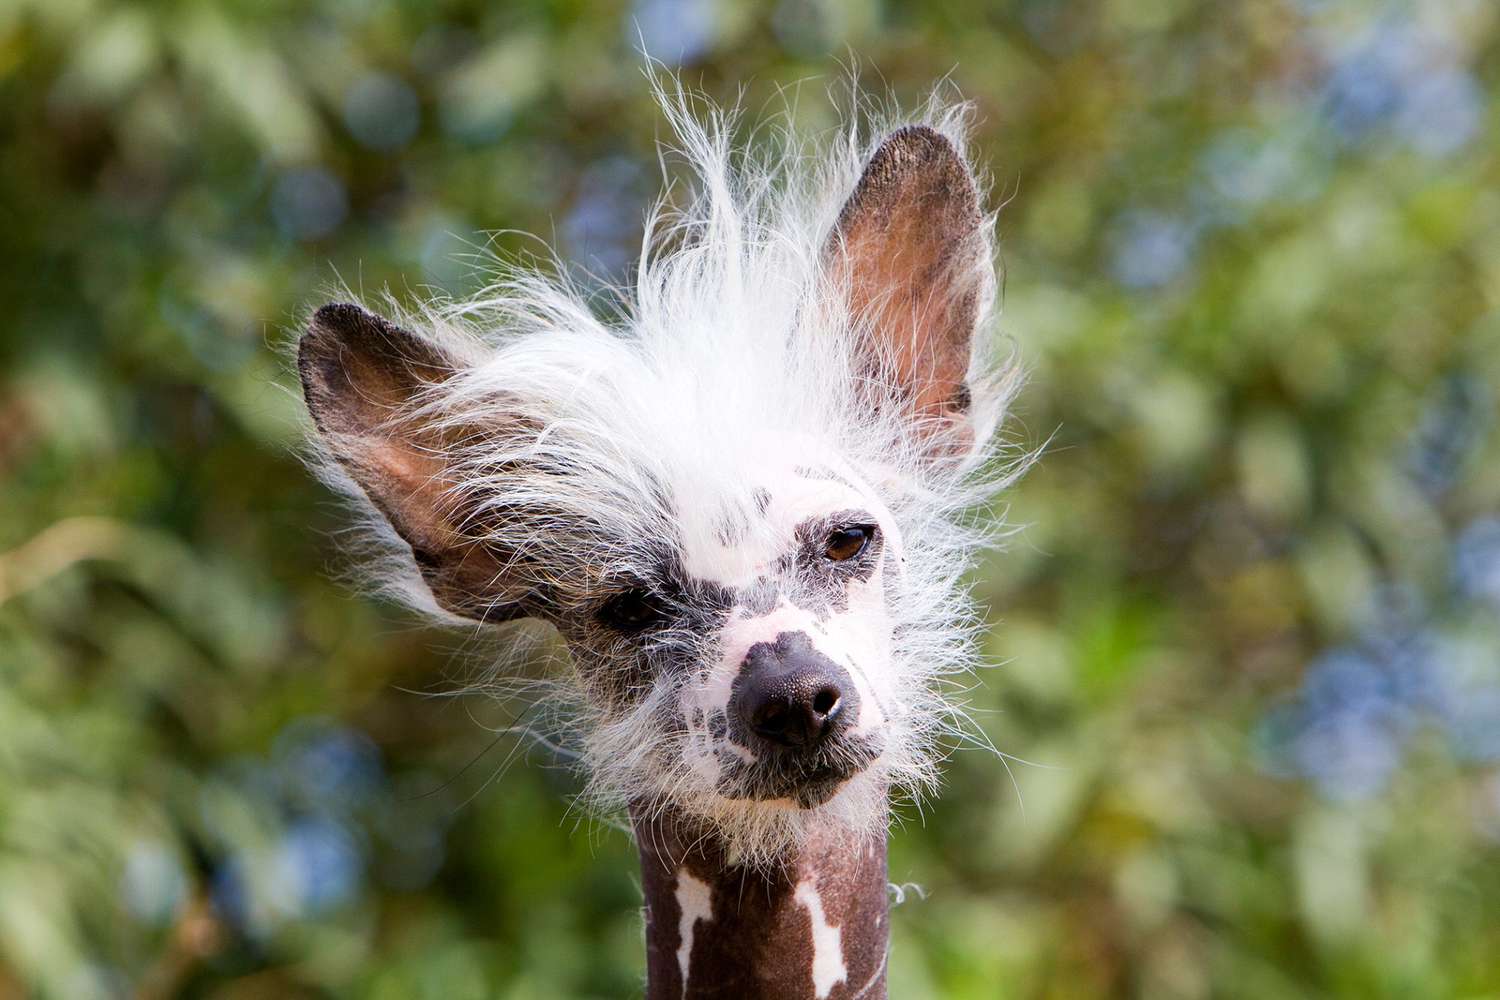 Bad hair day for this Chinese Crested dog